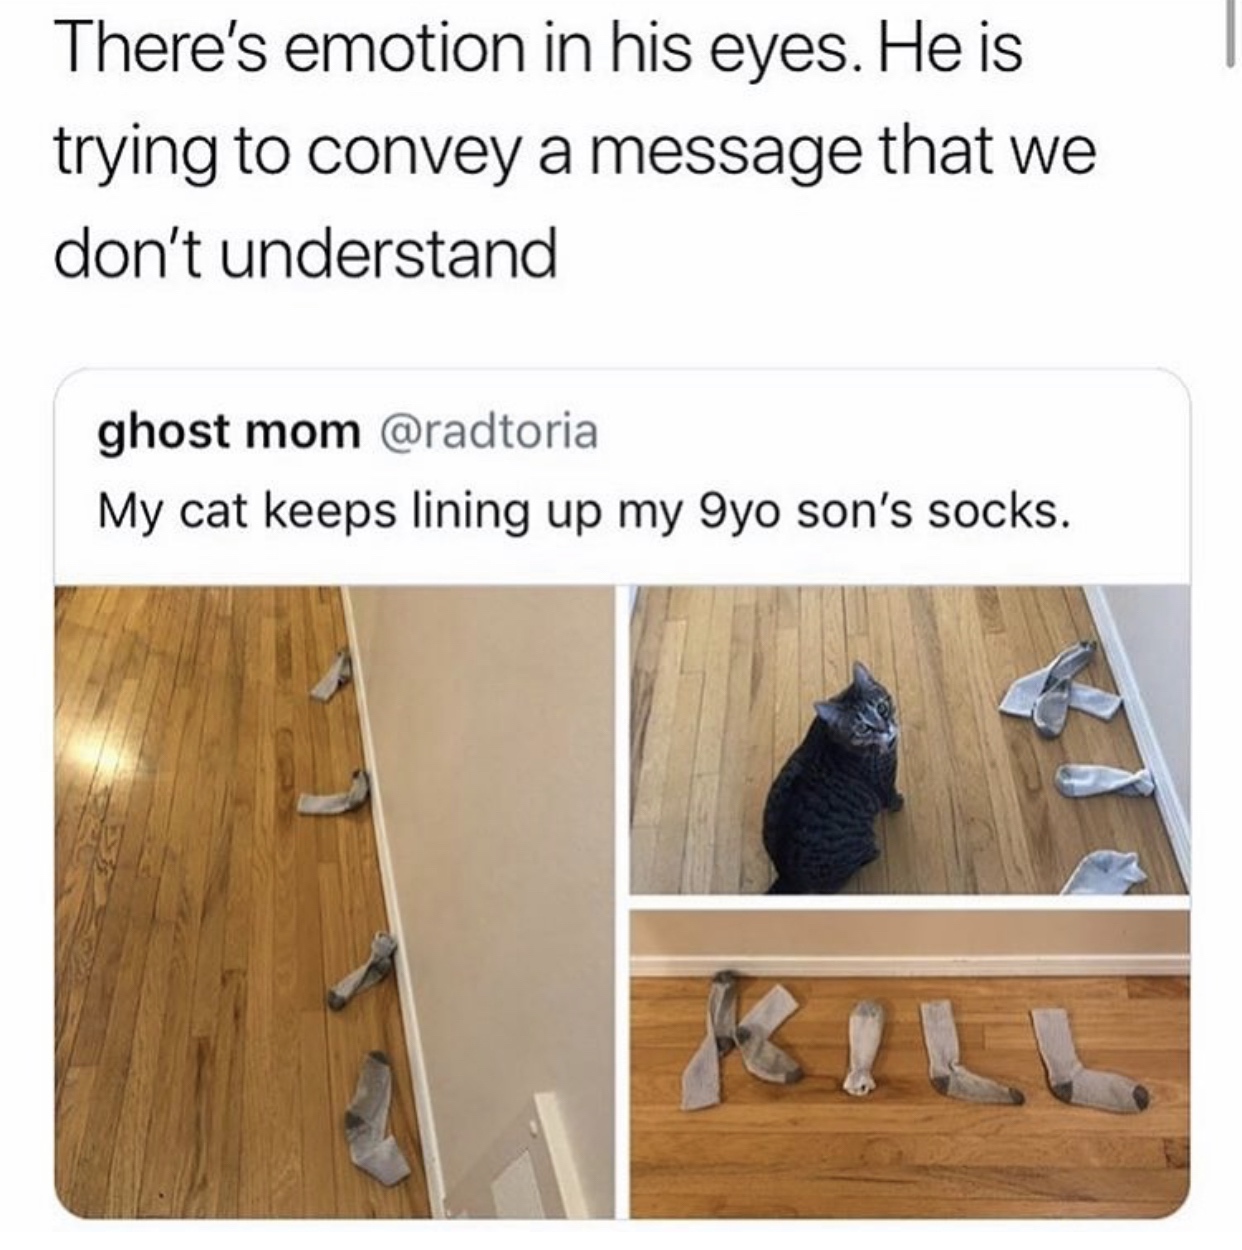 floor - There's emotion in his eyes. He is trying to convey a message that we don't understand ghost mom My cat keeps lining up my gyo son's socks.